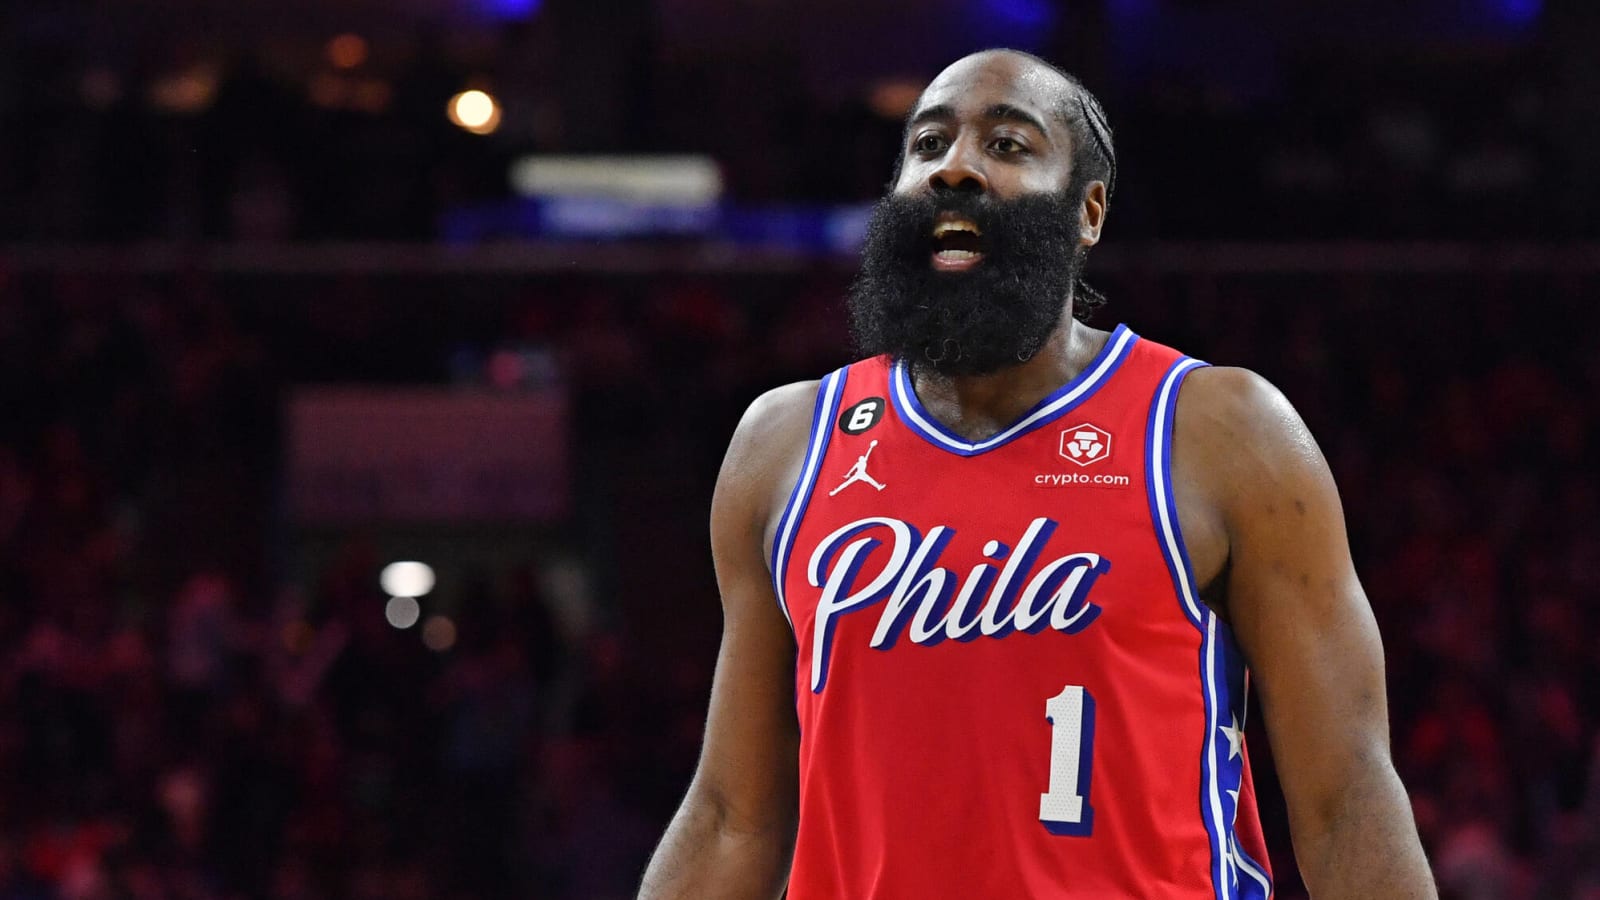 James Harden has awesome gesture for Michigan State shooting victim